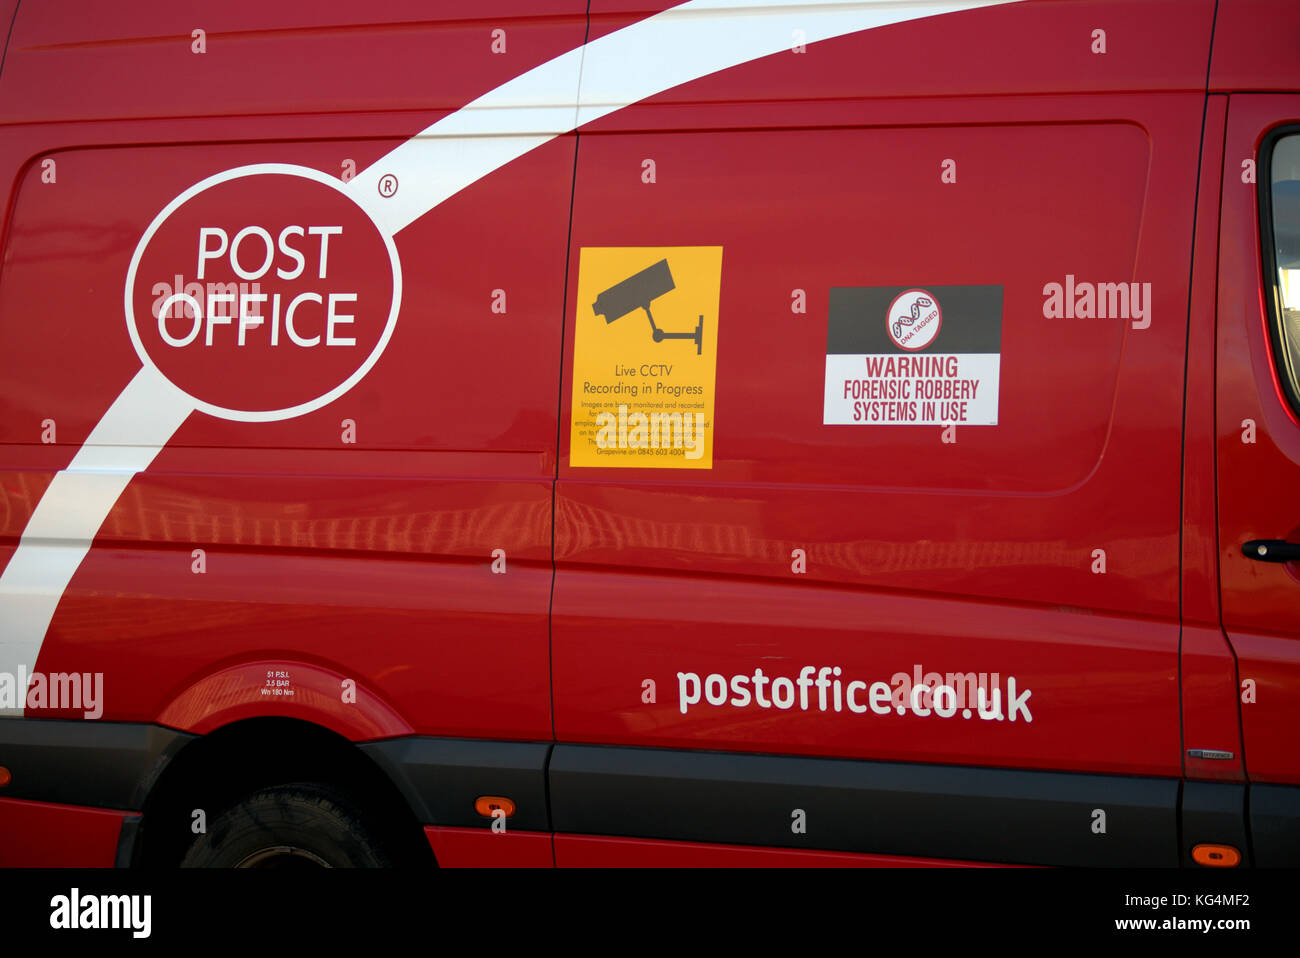 royal mail delivery van glasgow logo red car parked cctv warning stickers yellow forensic labels post office Stock Photo